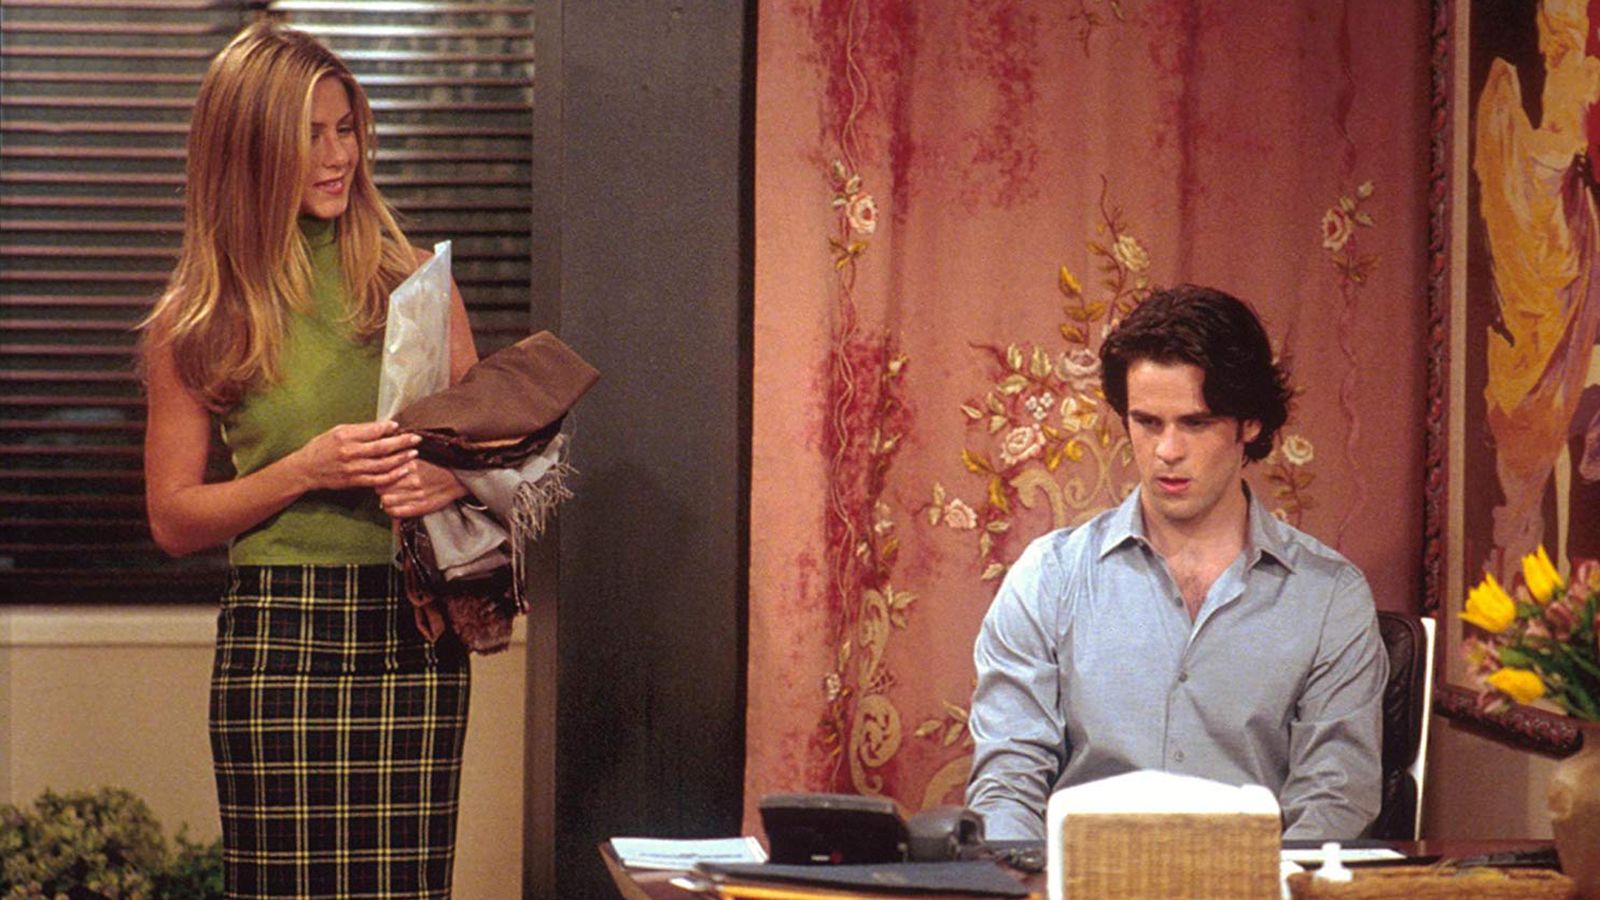 The One Where Ralph Lauren Collaborates With 'Friends